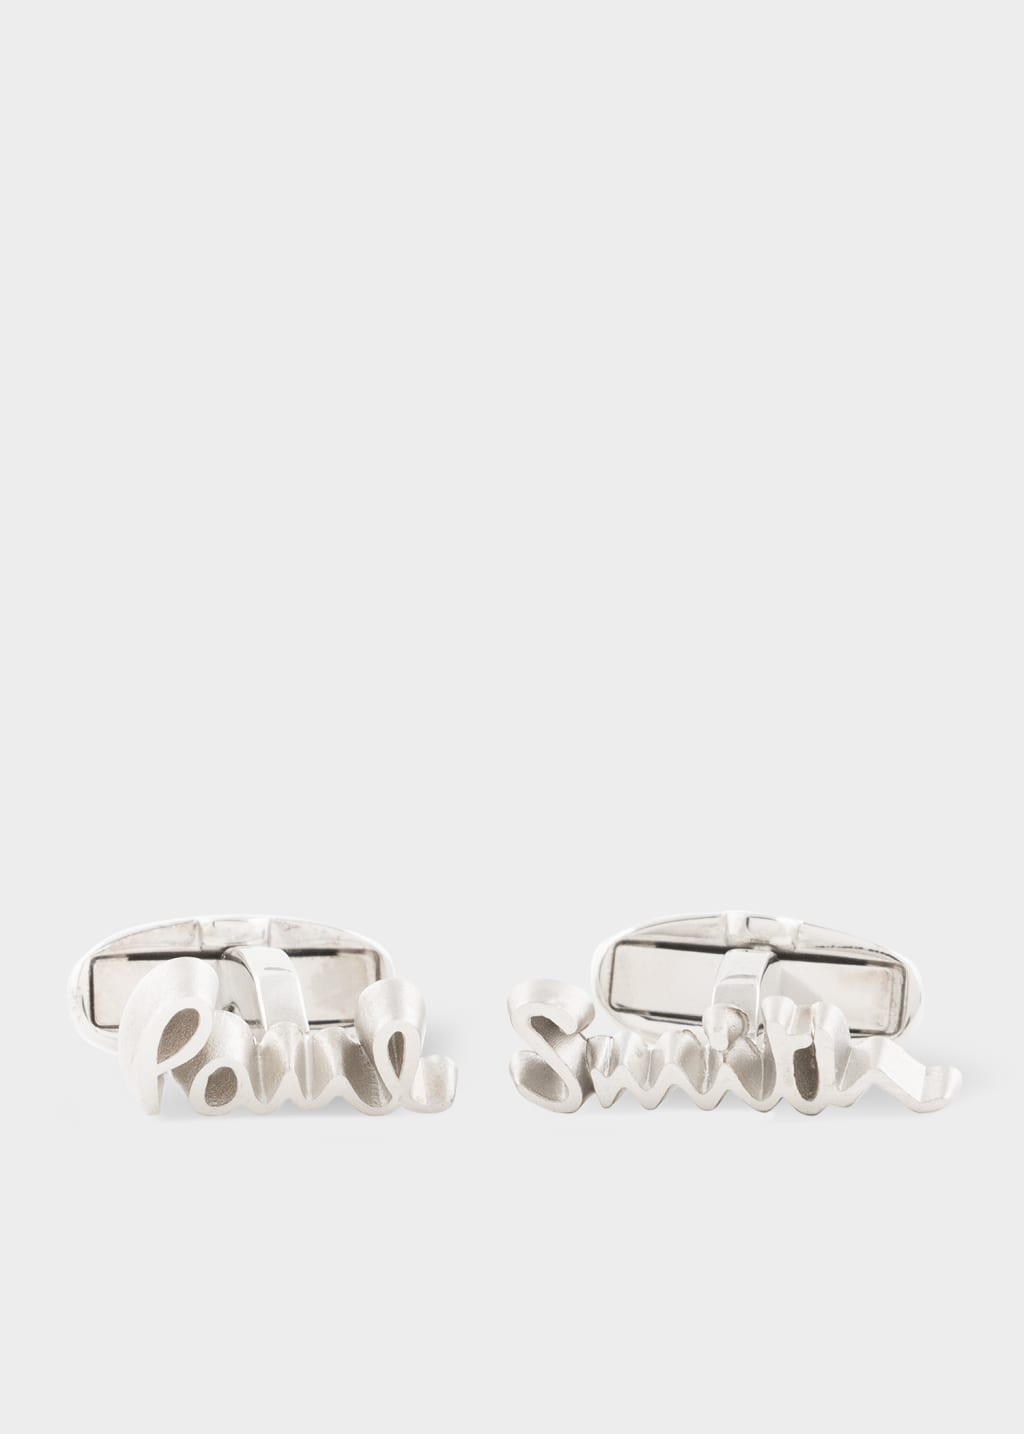 Front View - Silver Logo Cufflinks Paul Smith